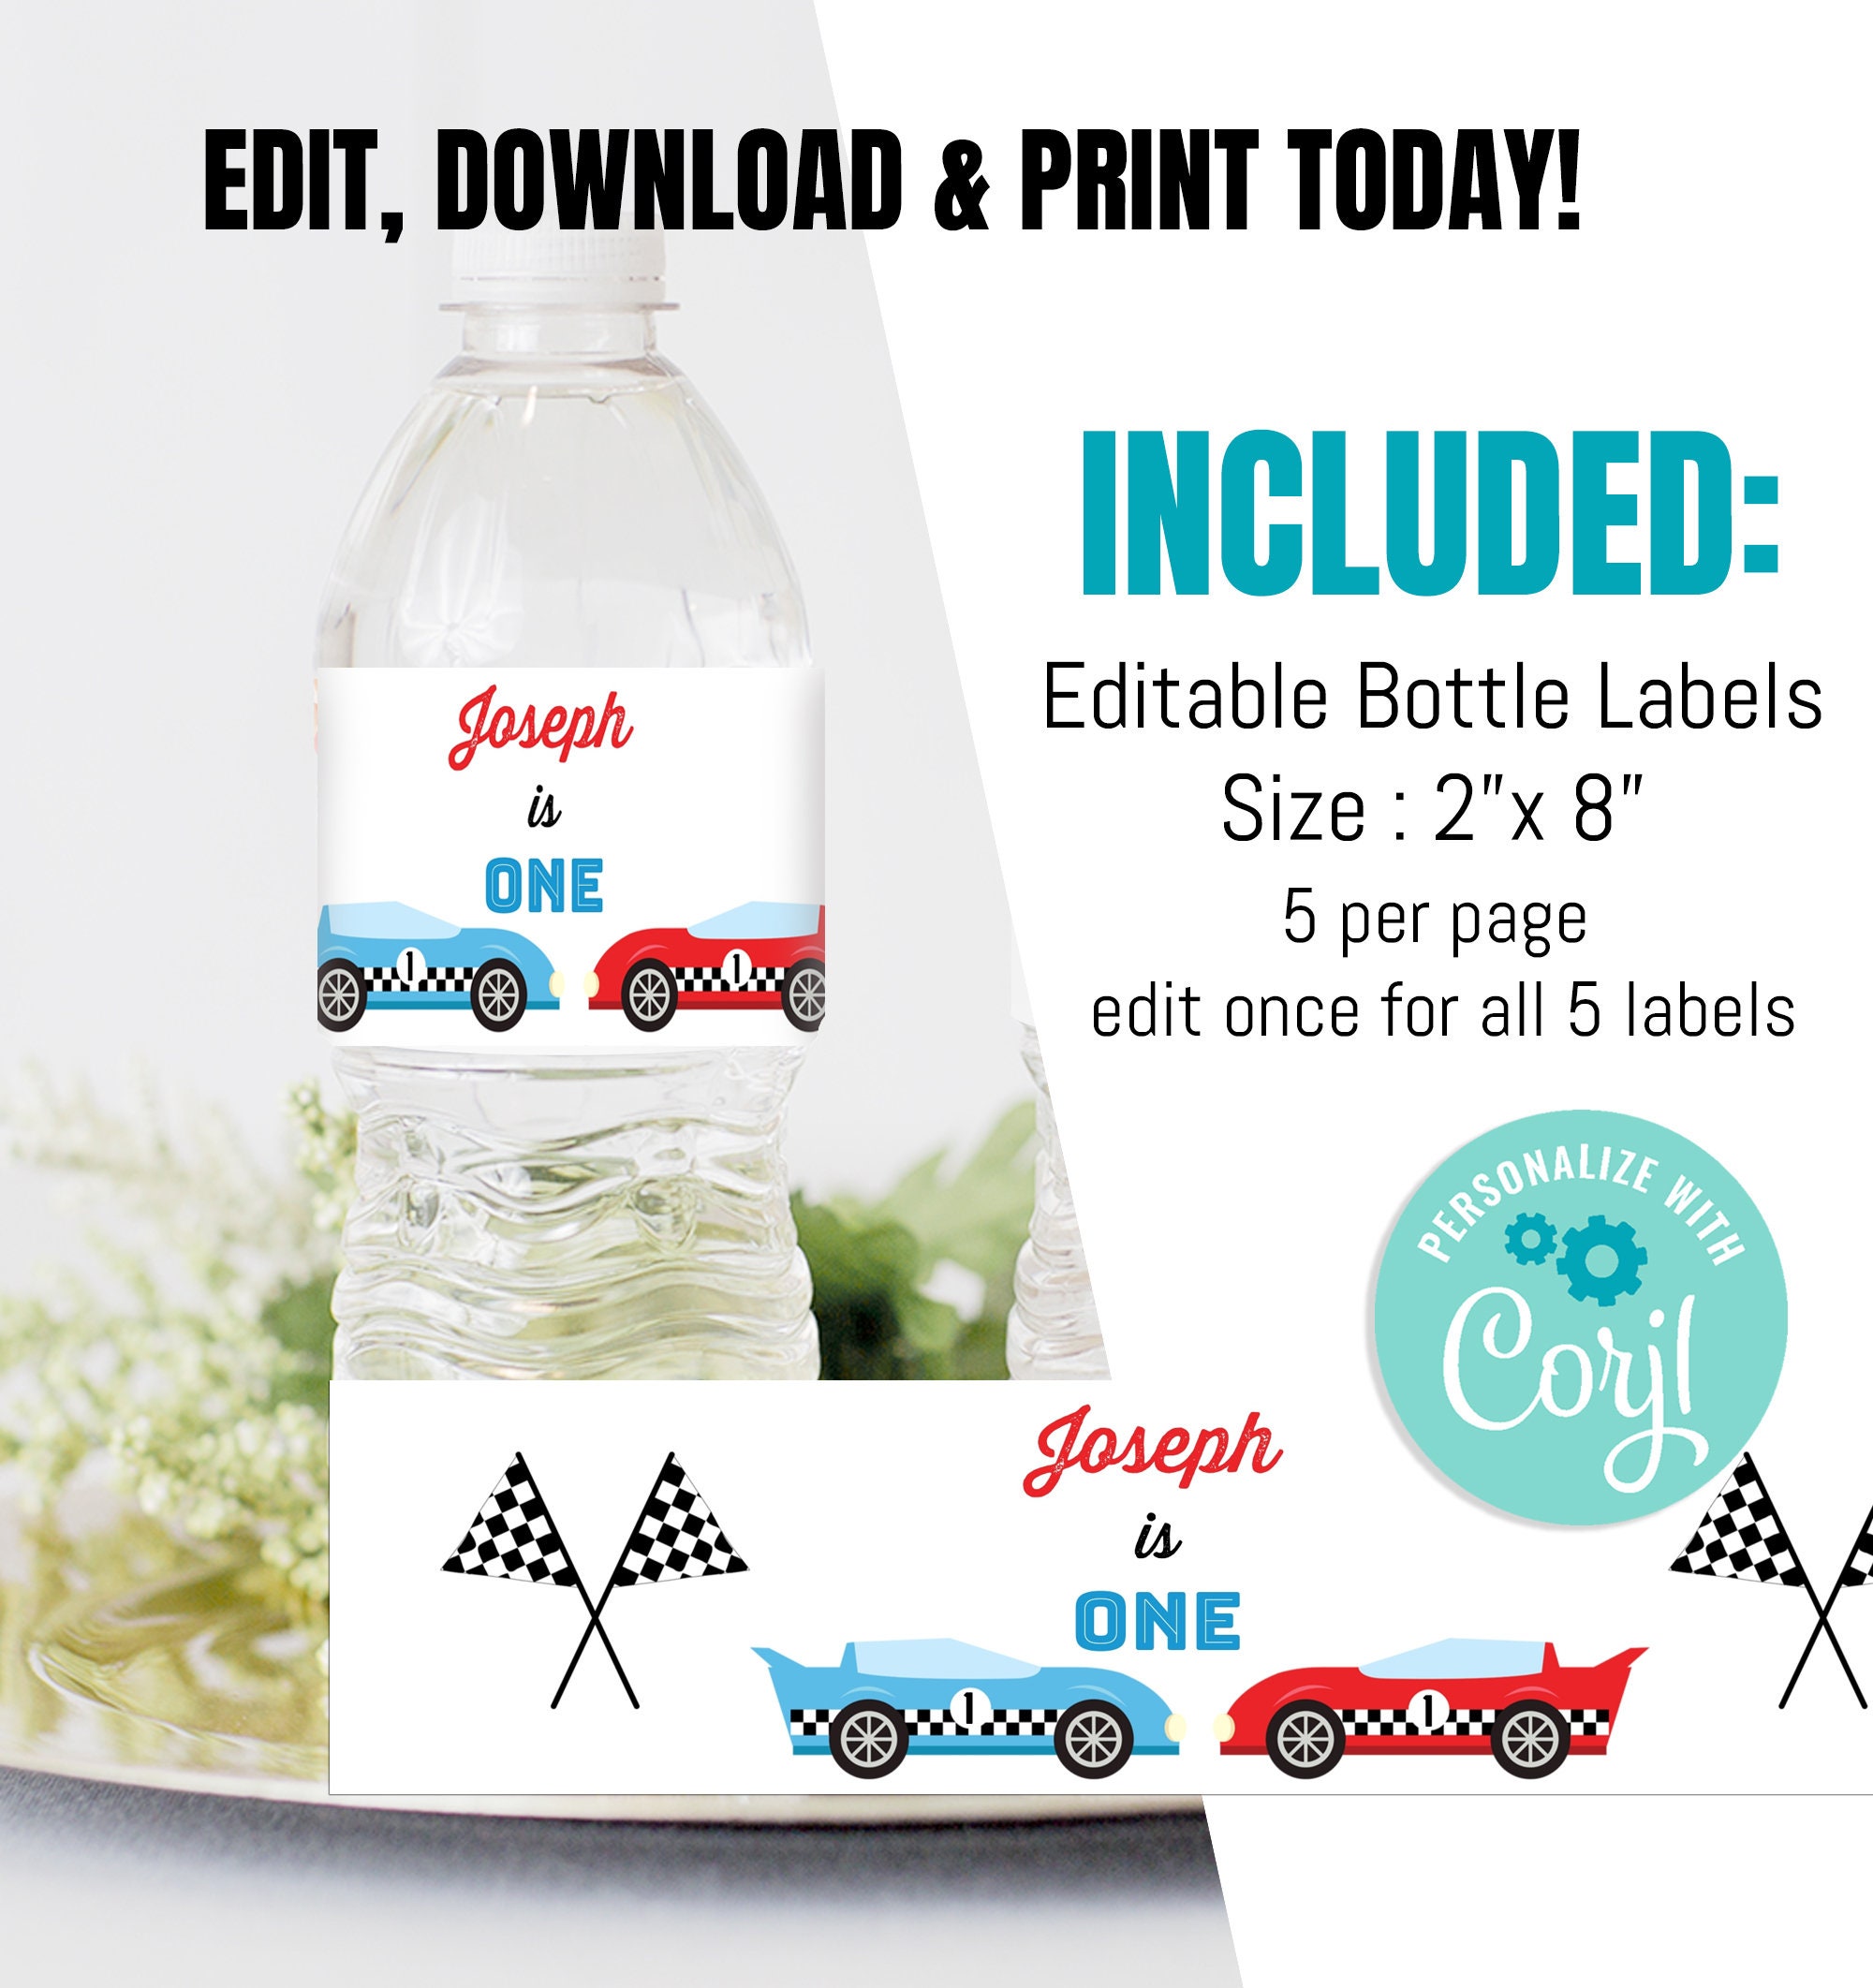 Race Car Fuel Birthday Water Bottle Labels – Chickabug